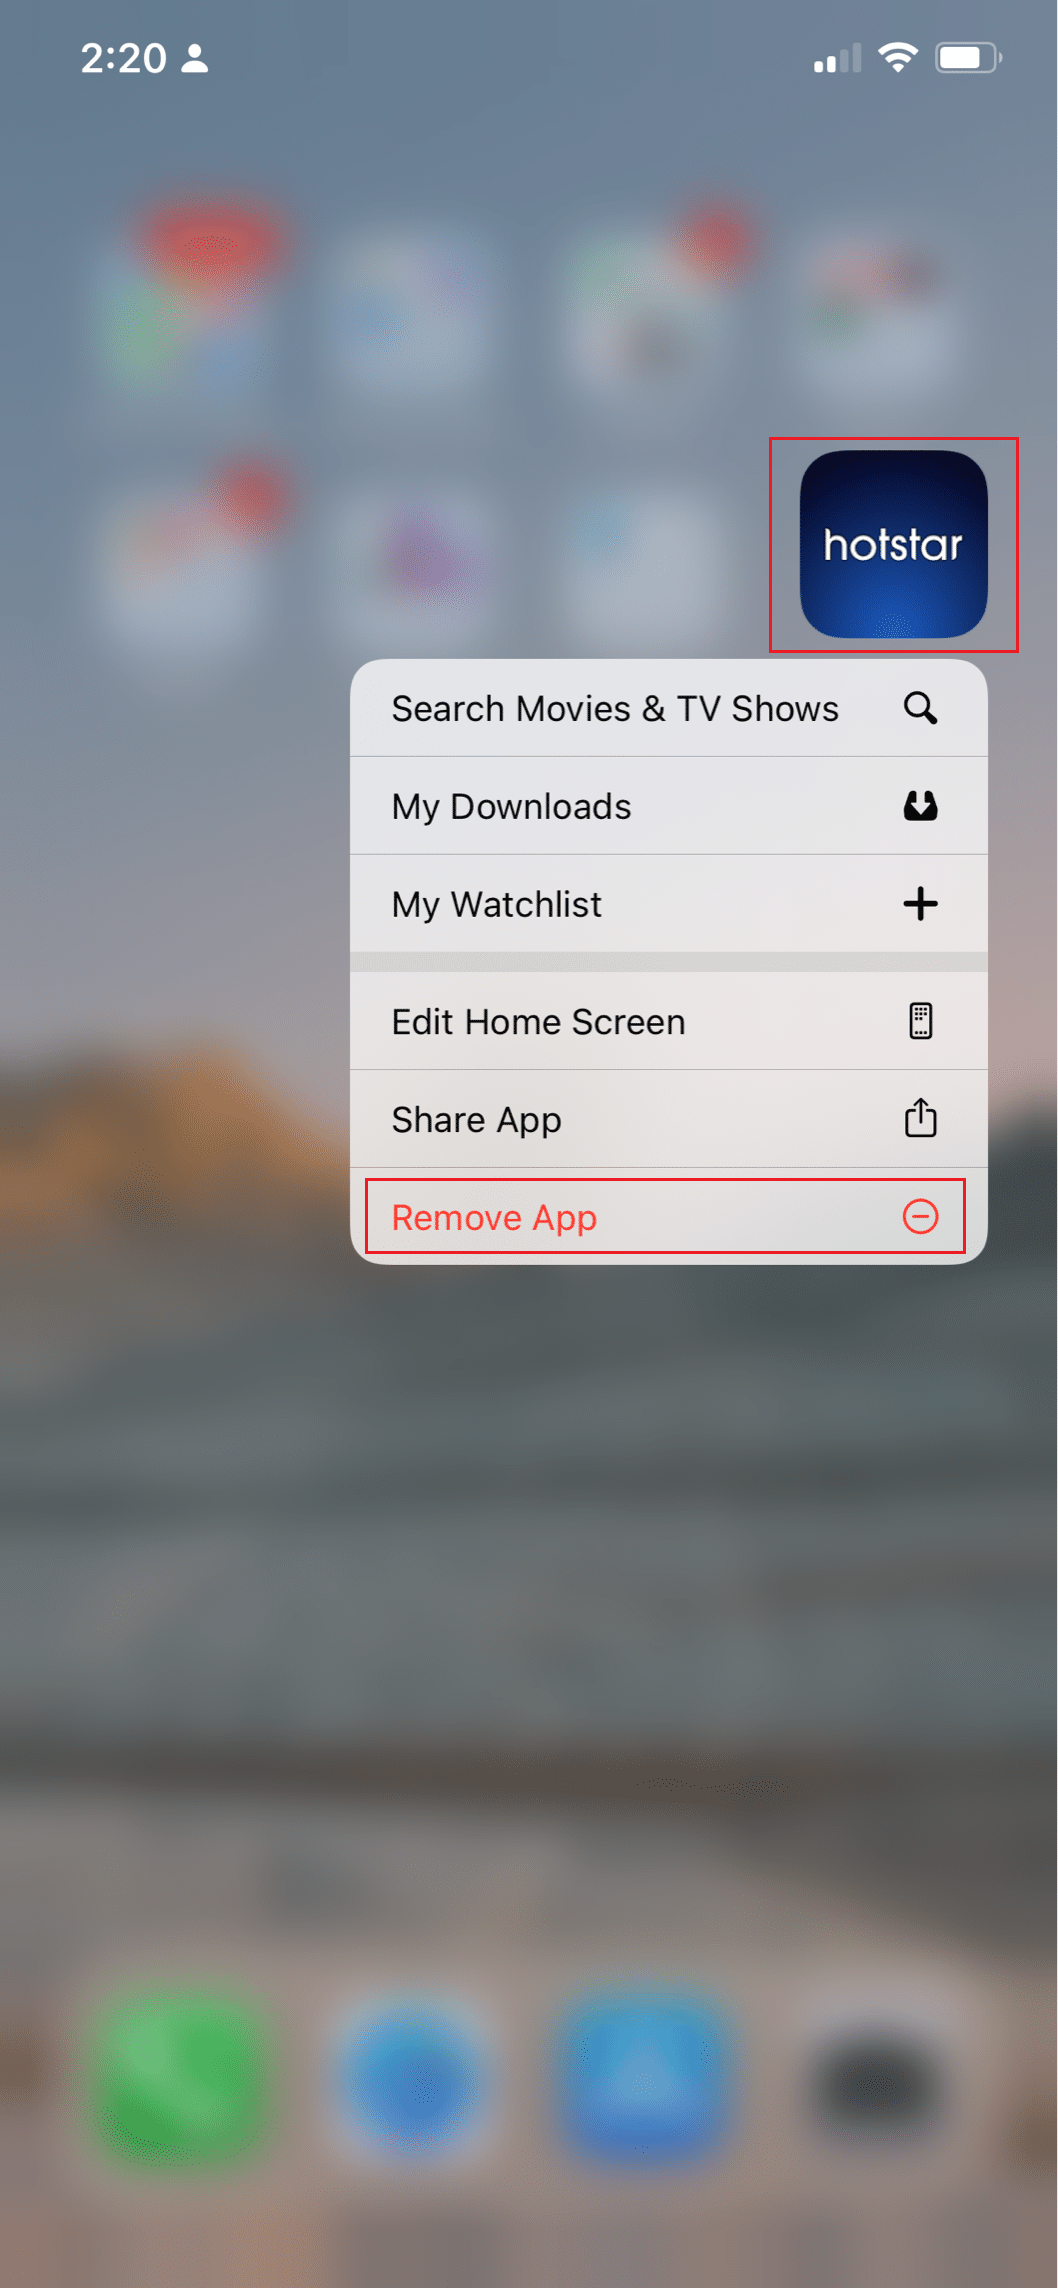 select the Remove app option for Hotstar app